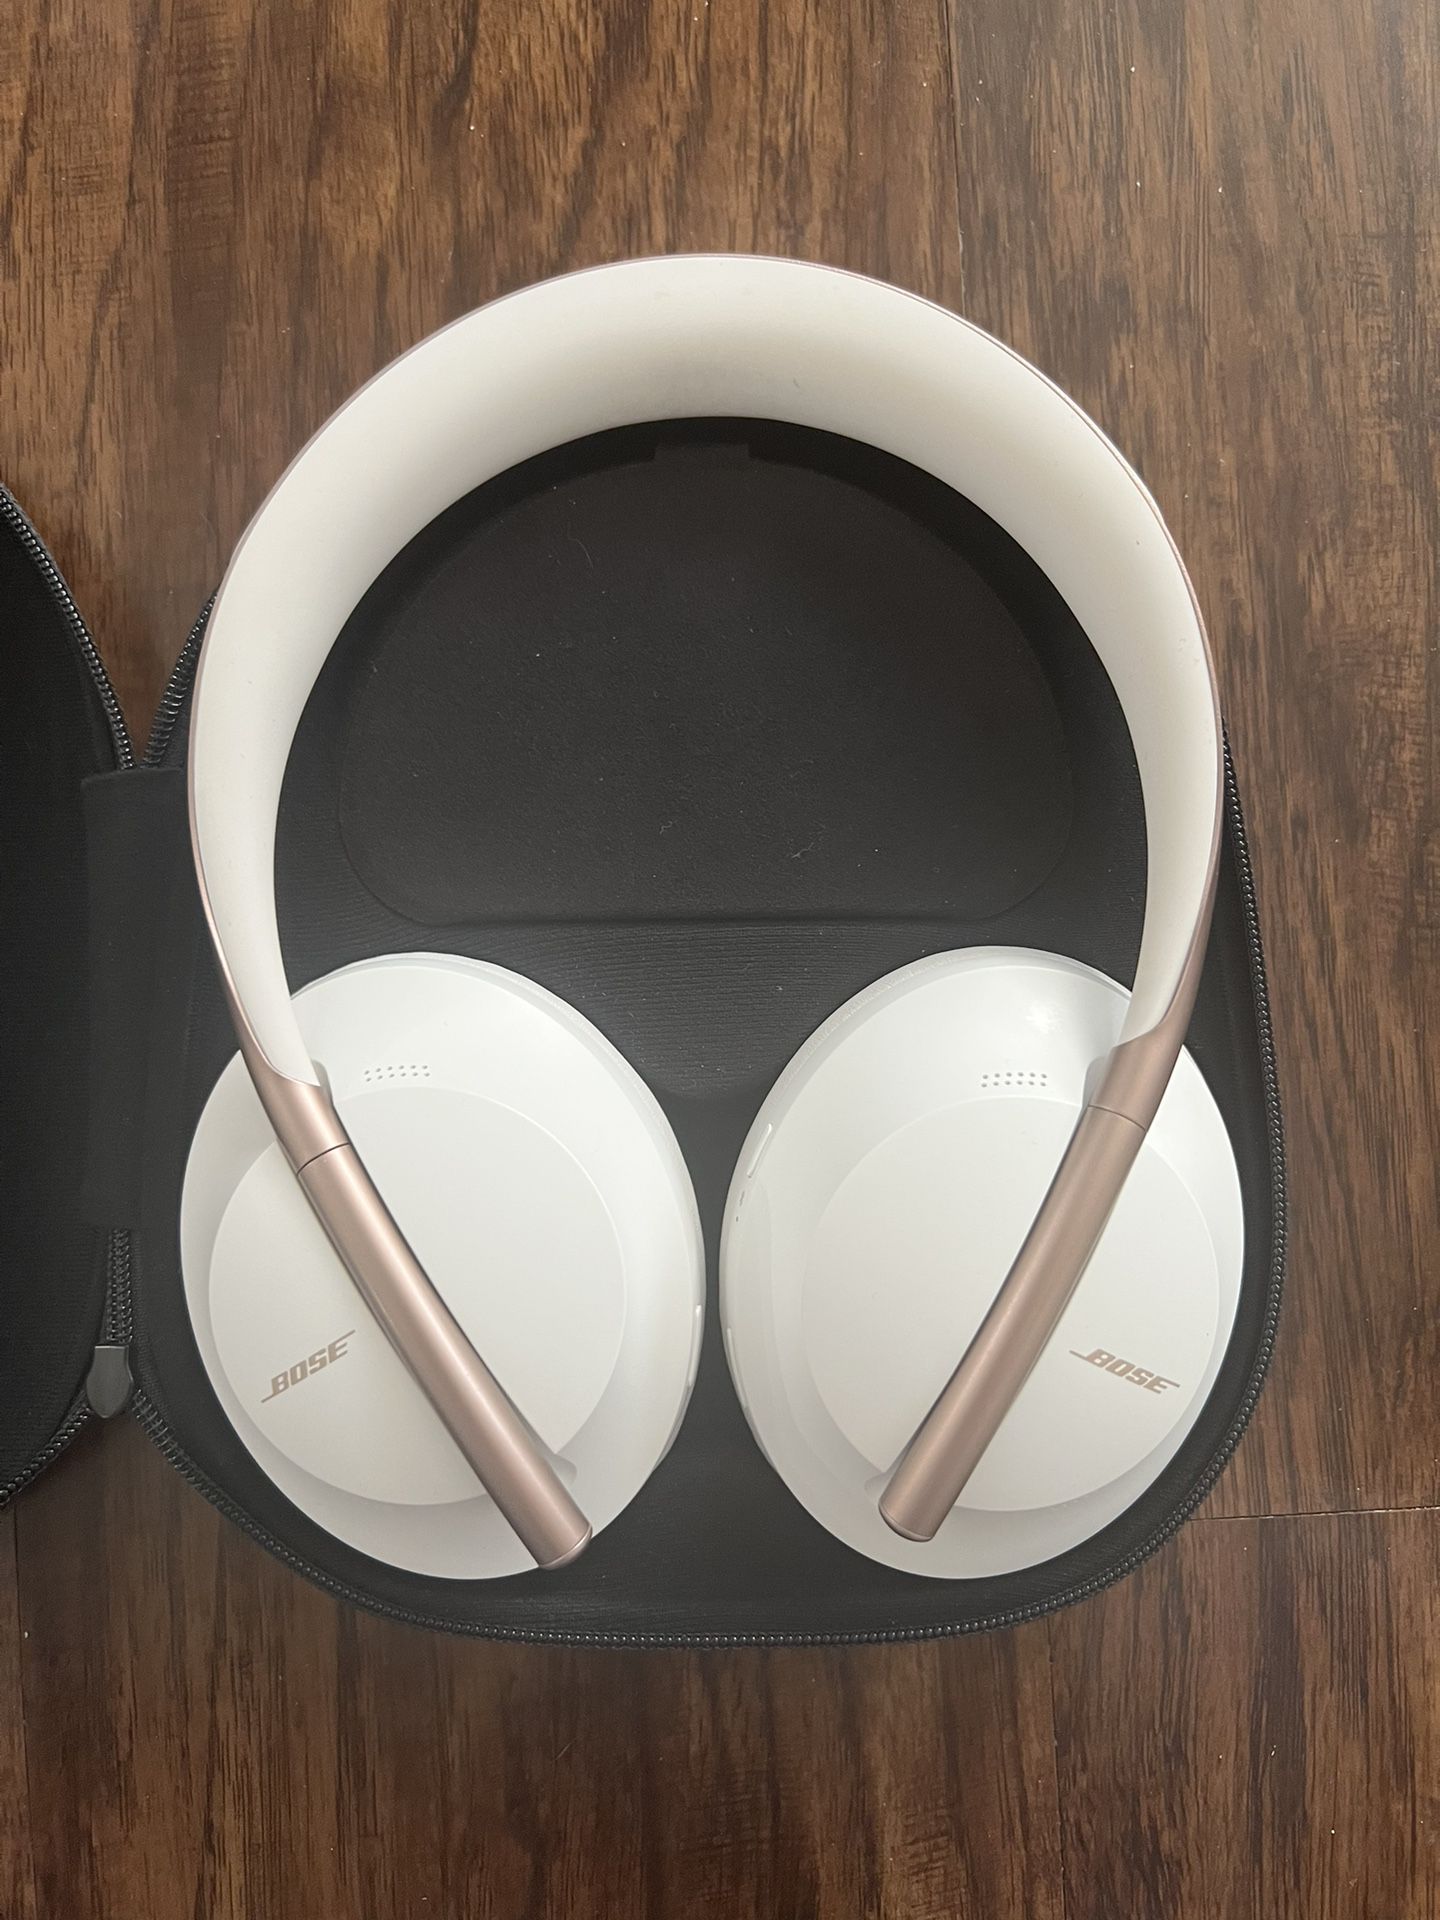 Bose Noise Cancelling 700 for Sale in Fort Lauderdale, FL - OfferUp